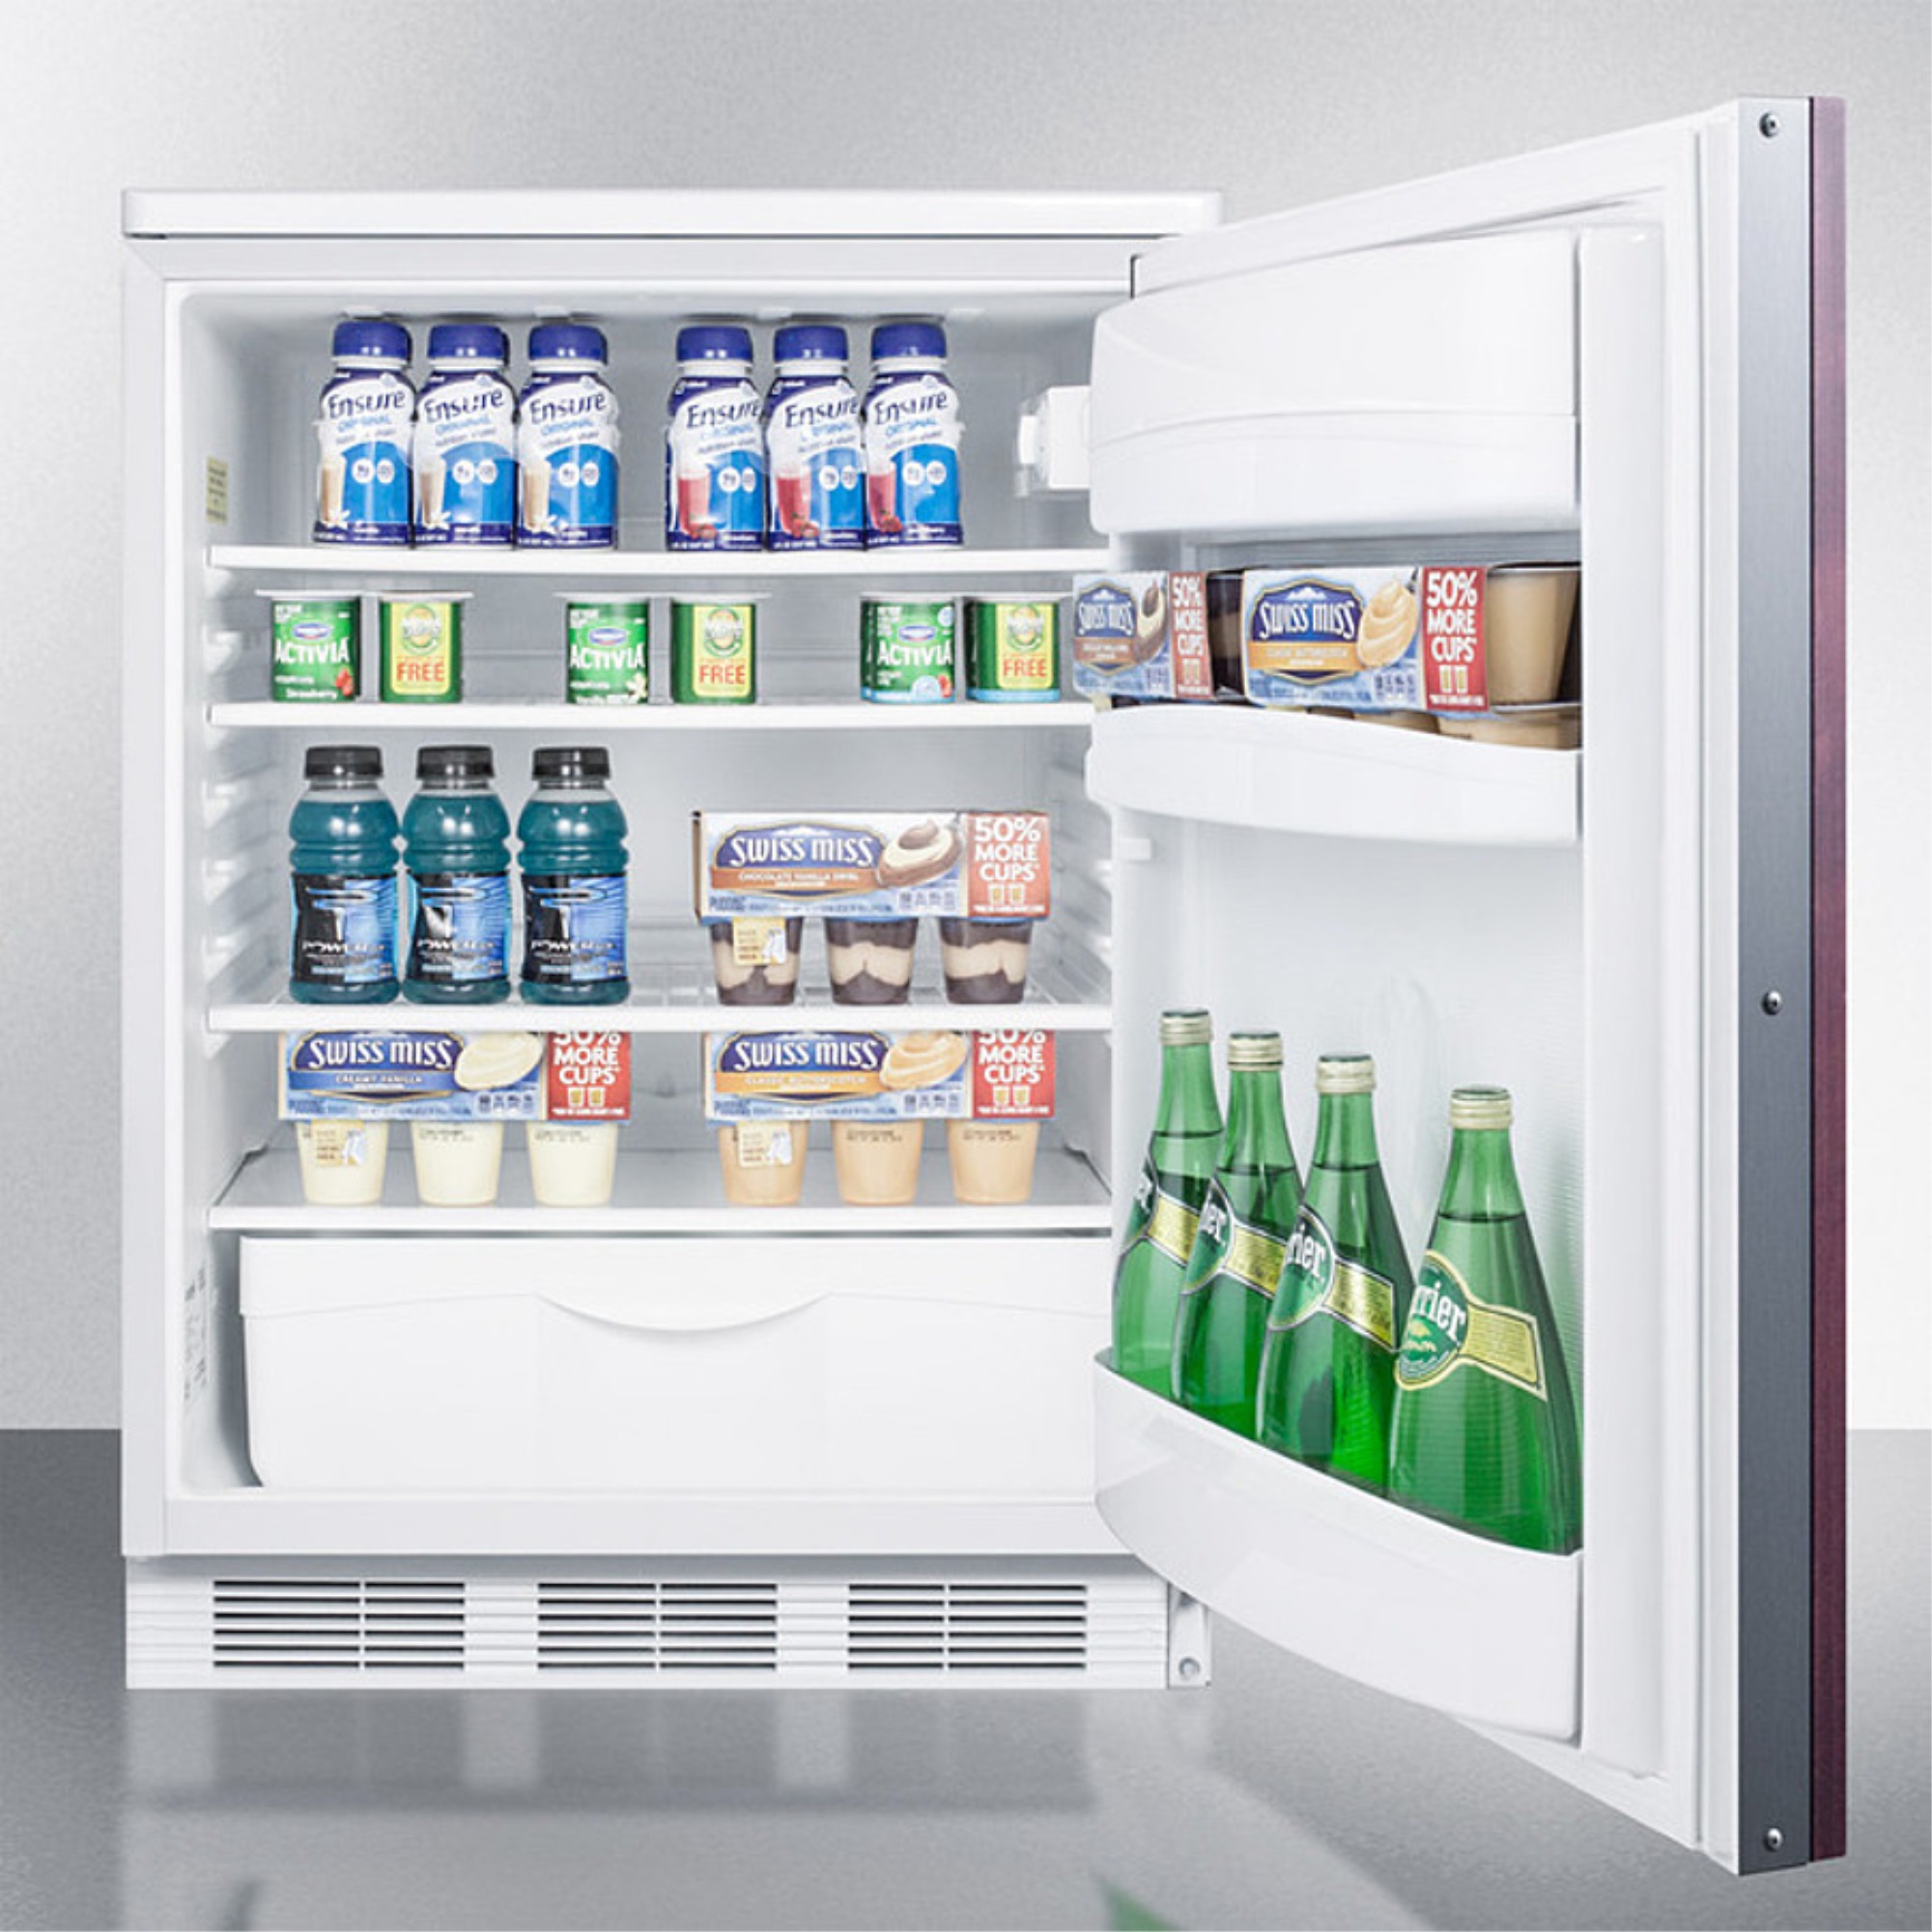 AccuCold Commercially approved built-in undercounter all-refrigerator with auto defrost, deluxe interior, and front lock; capable of ac